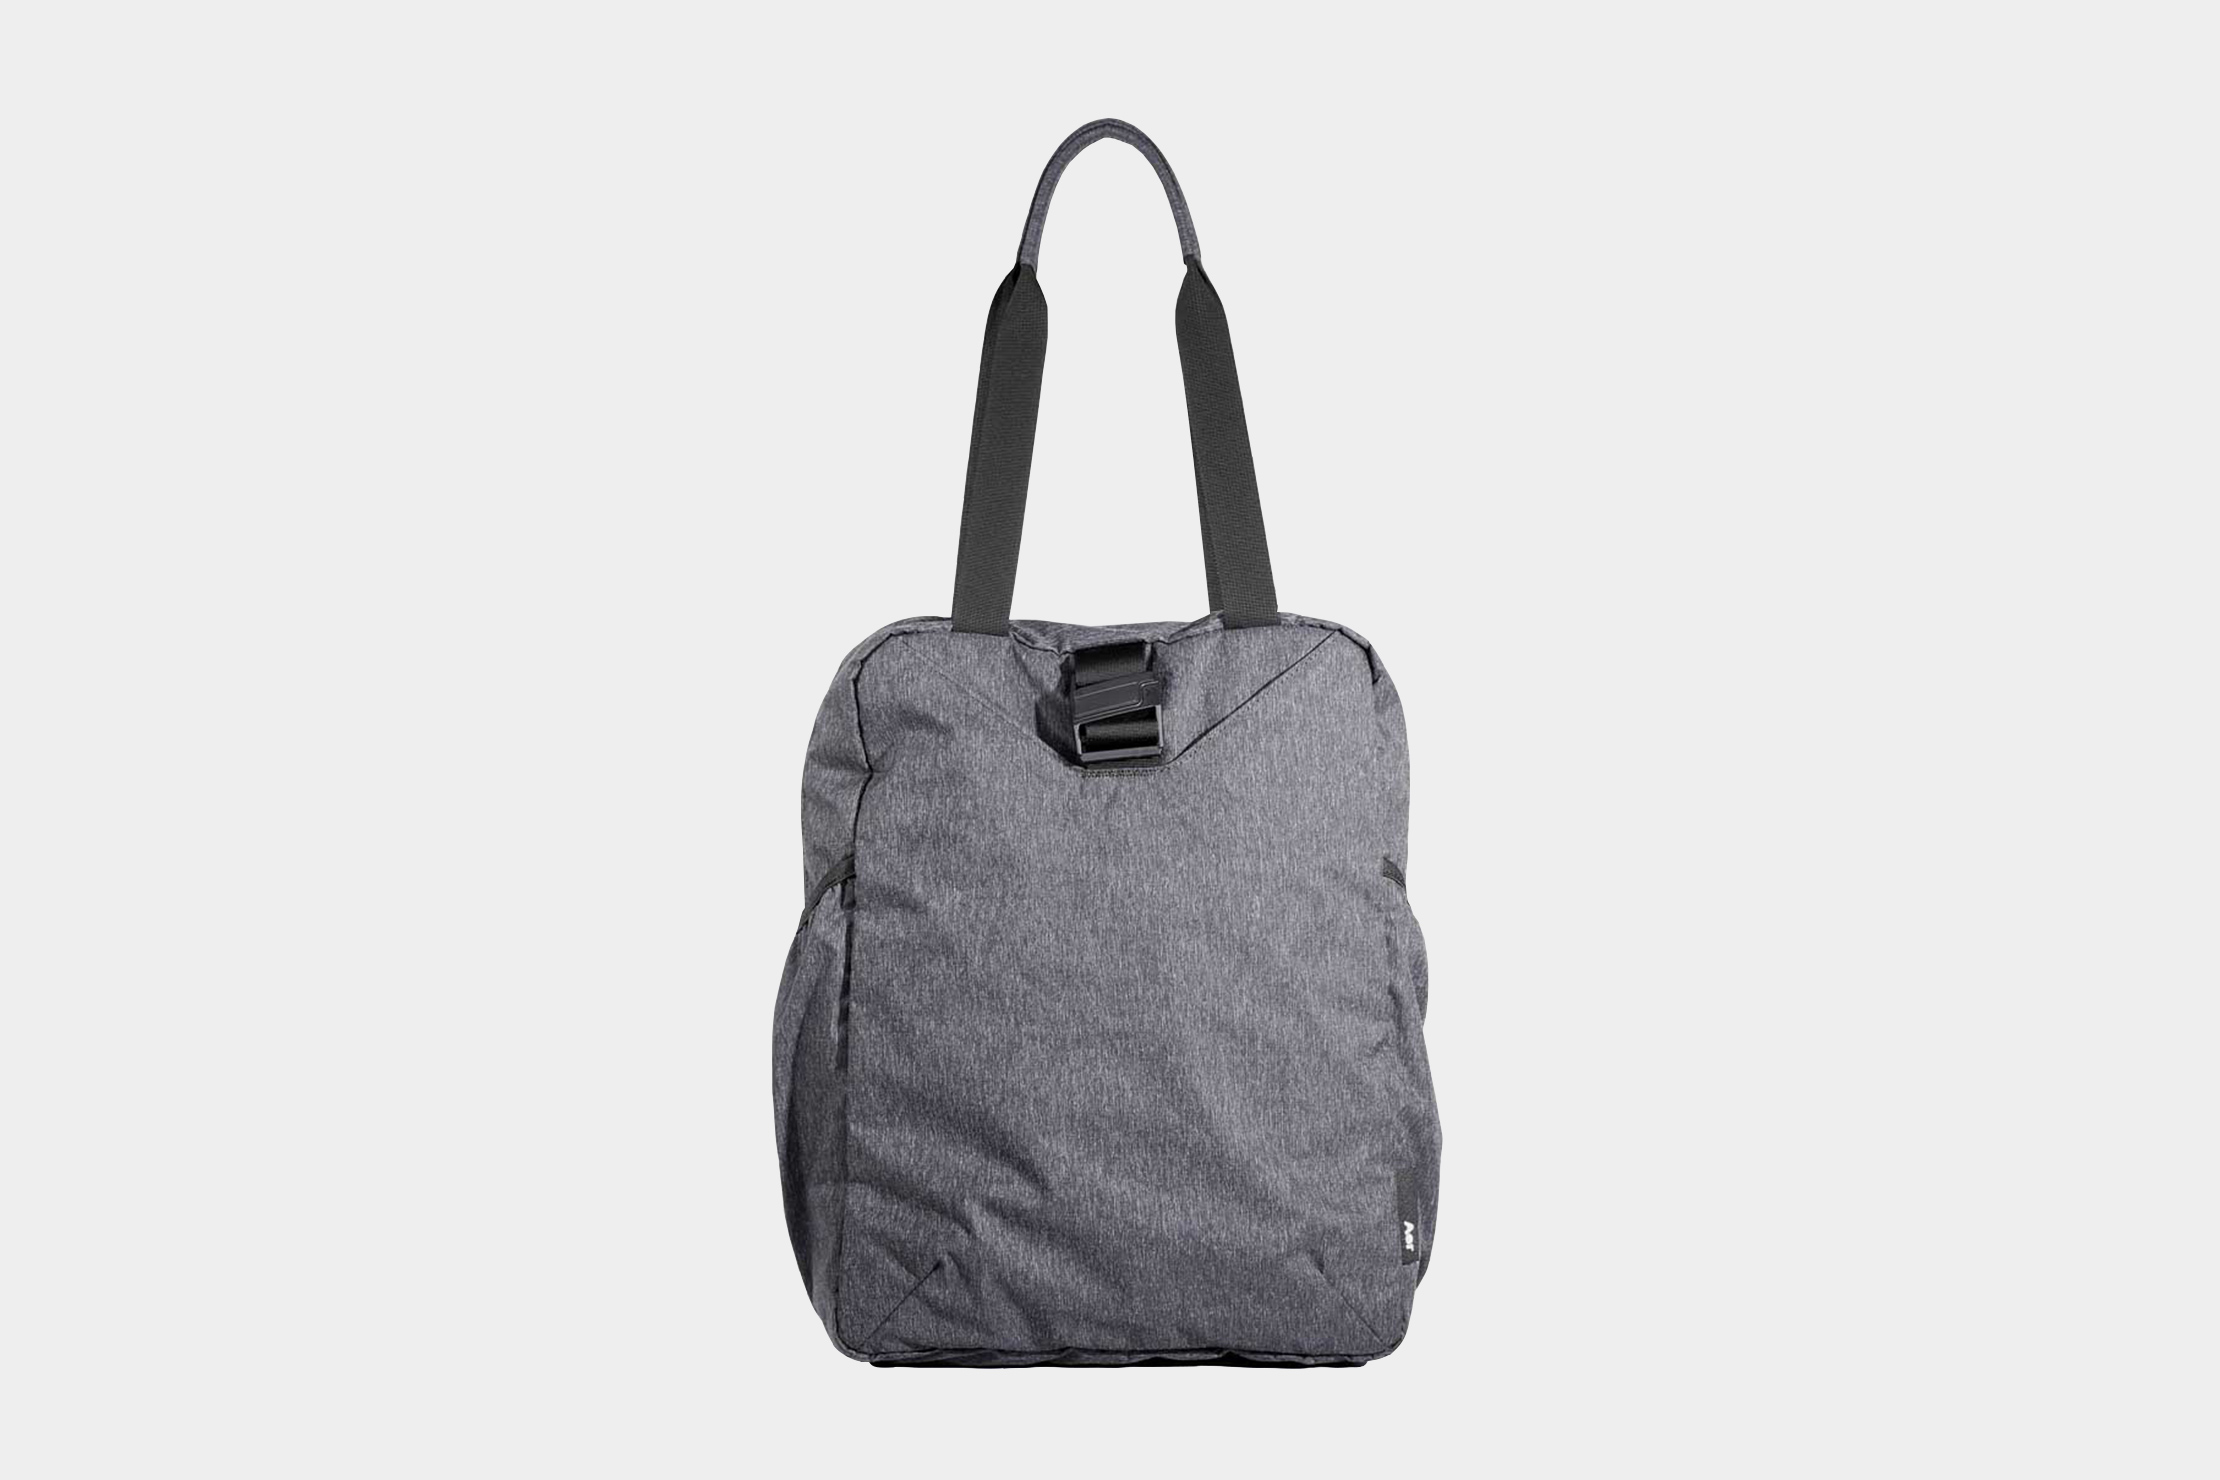 Aer Go Tote Quick Look (Packable) | Pack Hacker